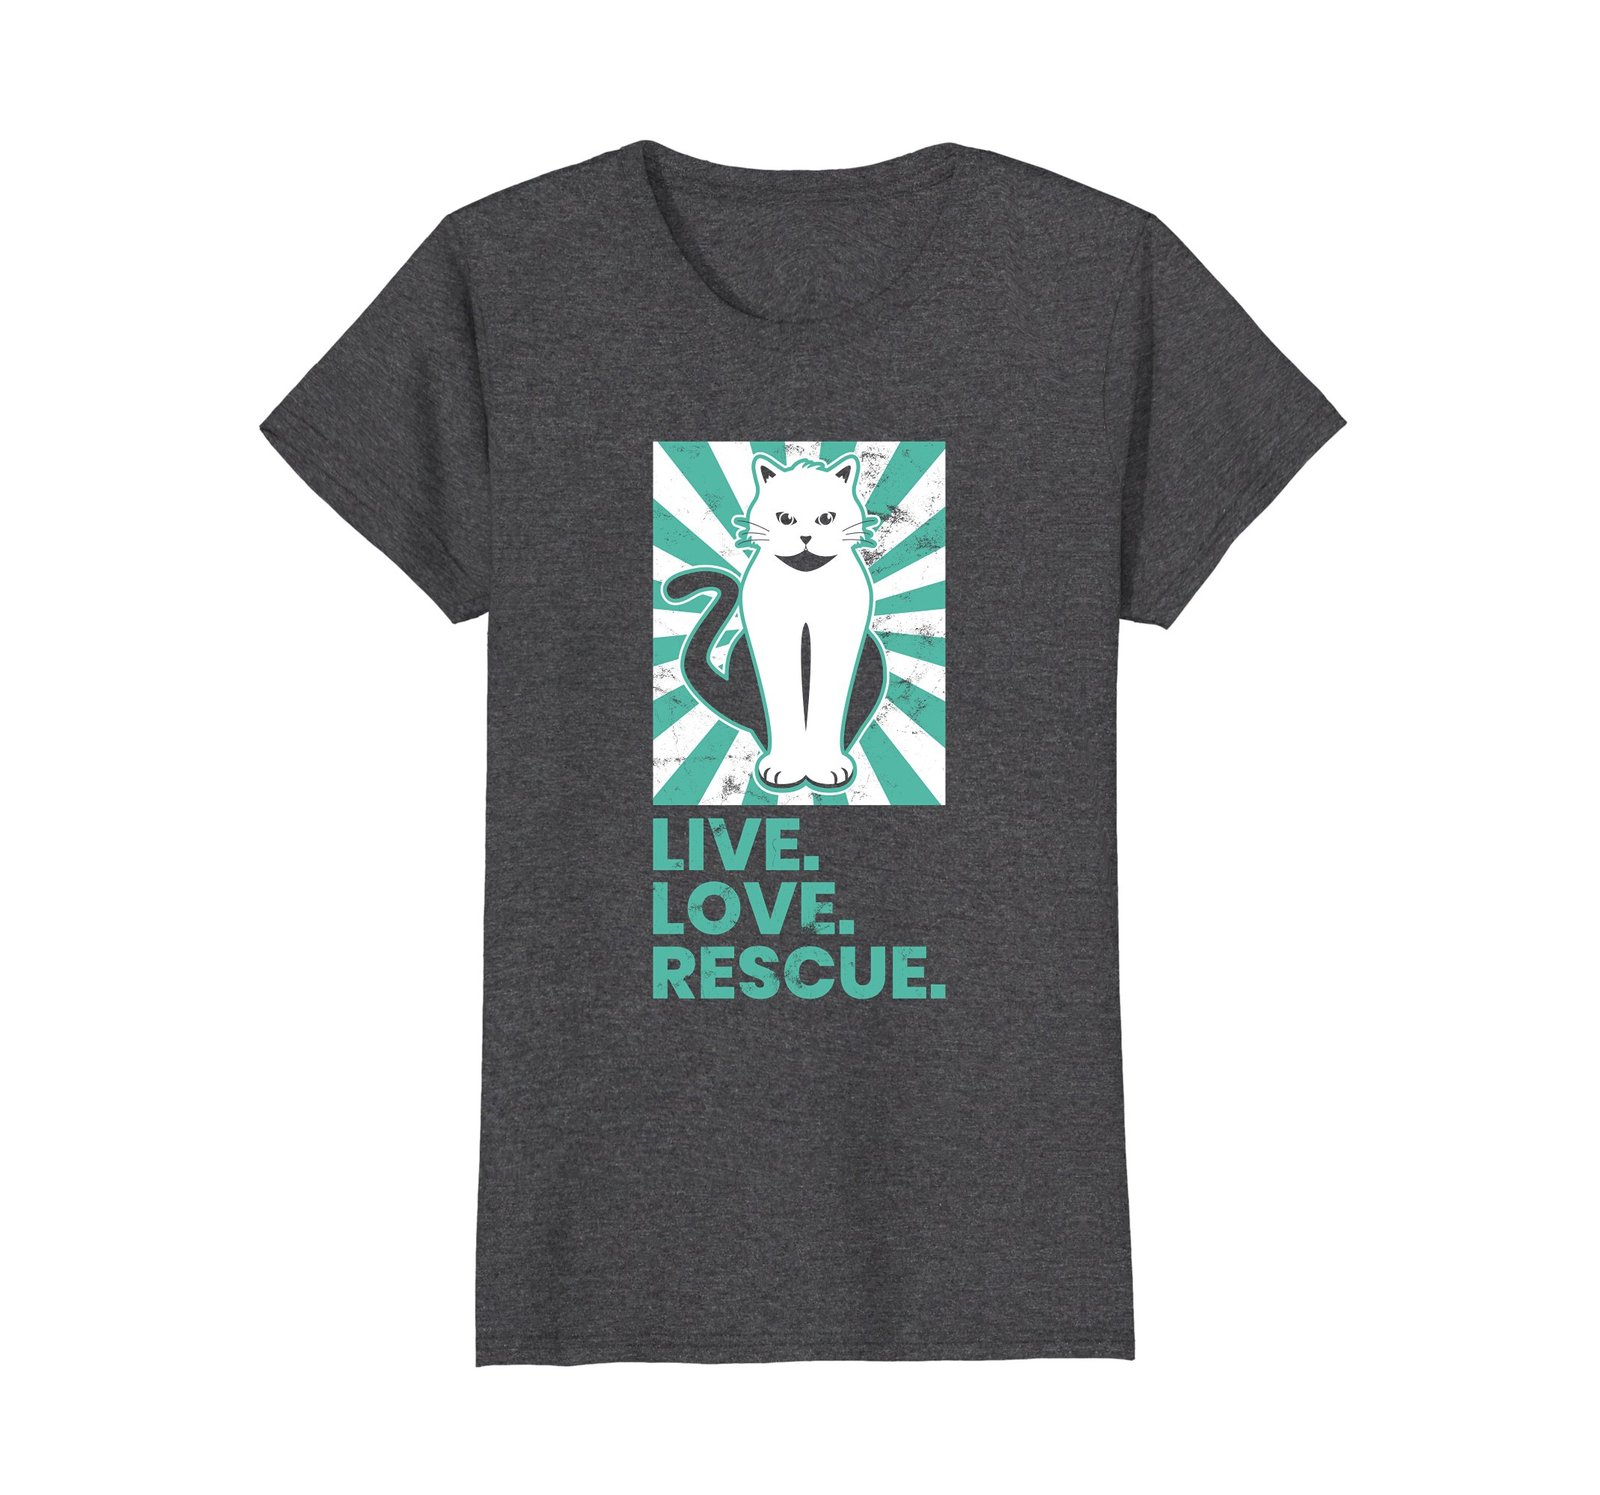 Animal Rescue Shirt Live Love Rescue Cute Kitty Cat Vintage - $19.99 - $20.99